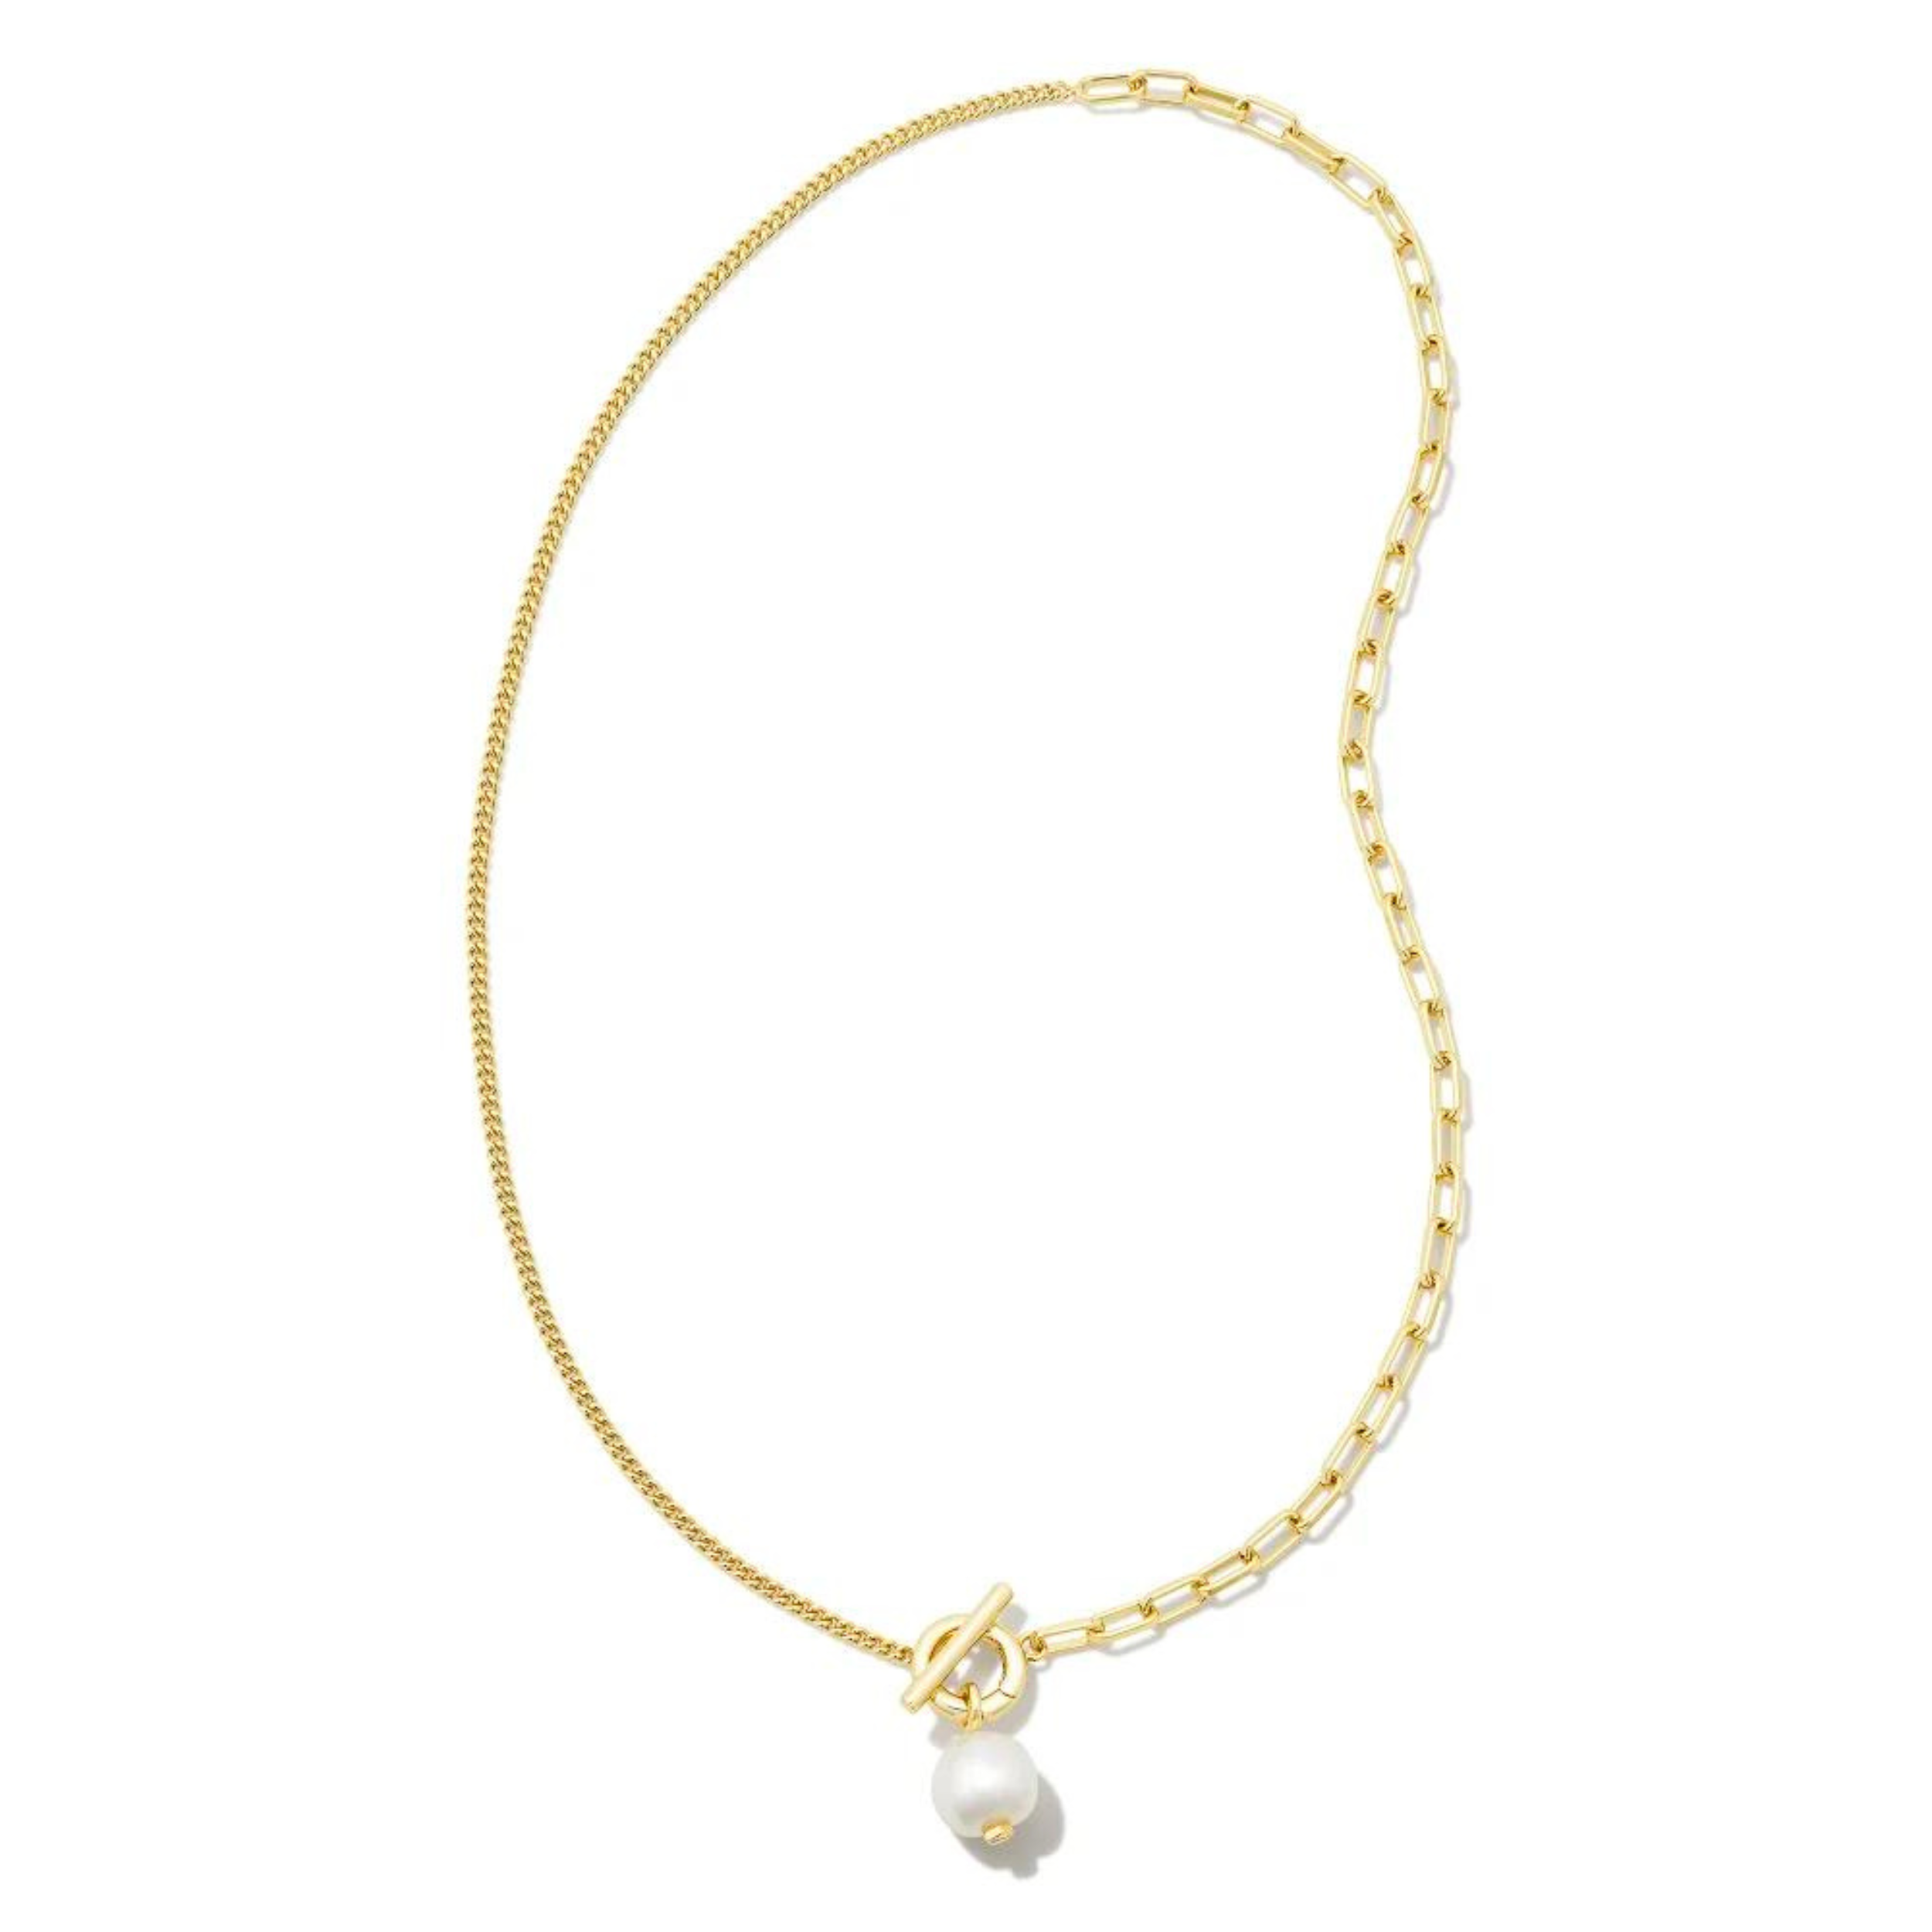 Kendra Scott | Leighton Gold Pearl Chain Necklace in White Pearl - Giddy Up Glamour Boutique